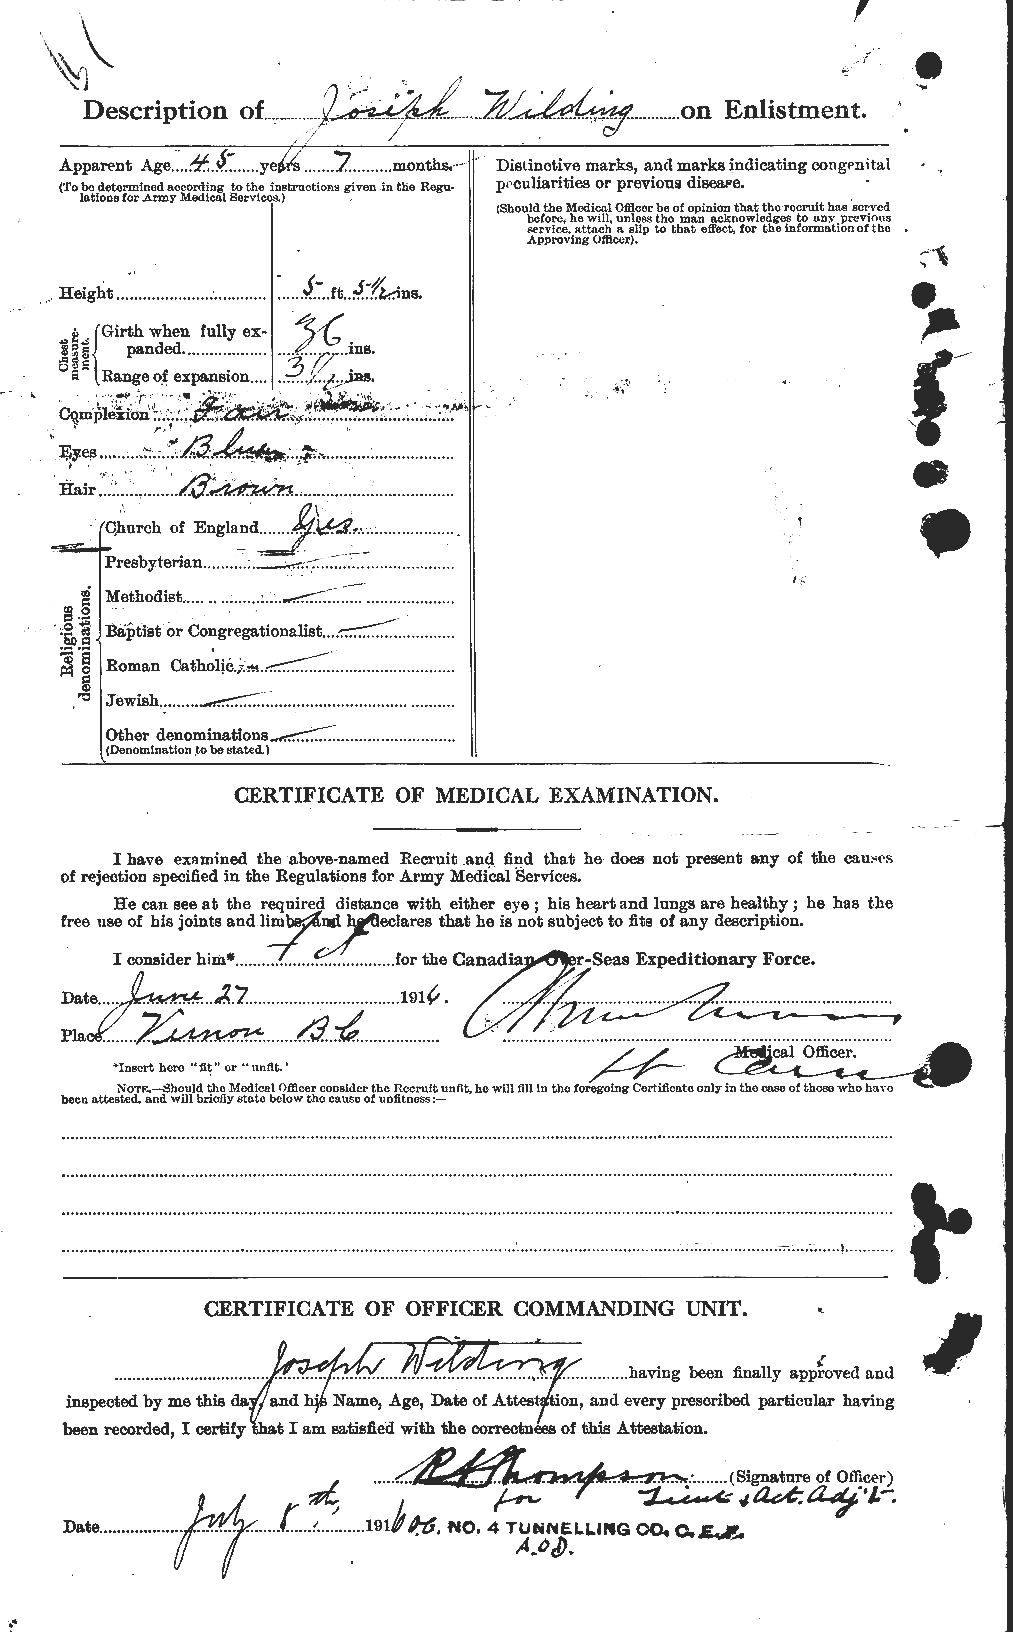 Personnel Records of the First World War - CEF 680104b